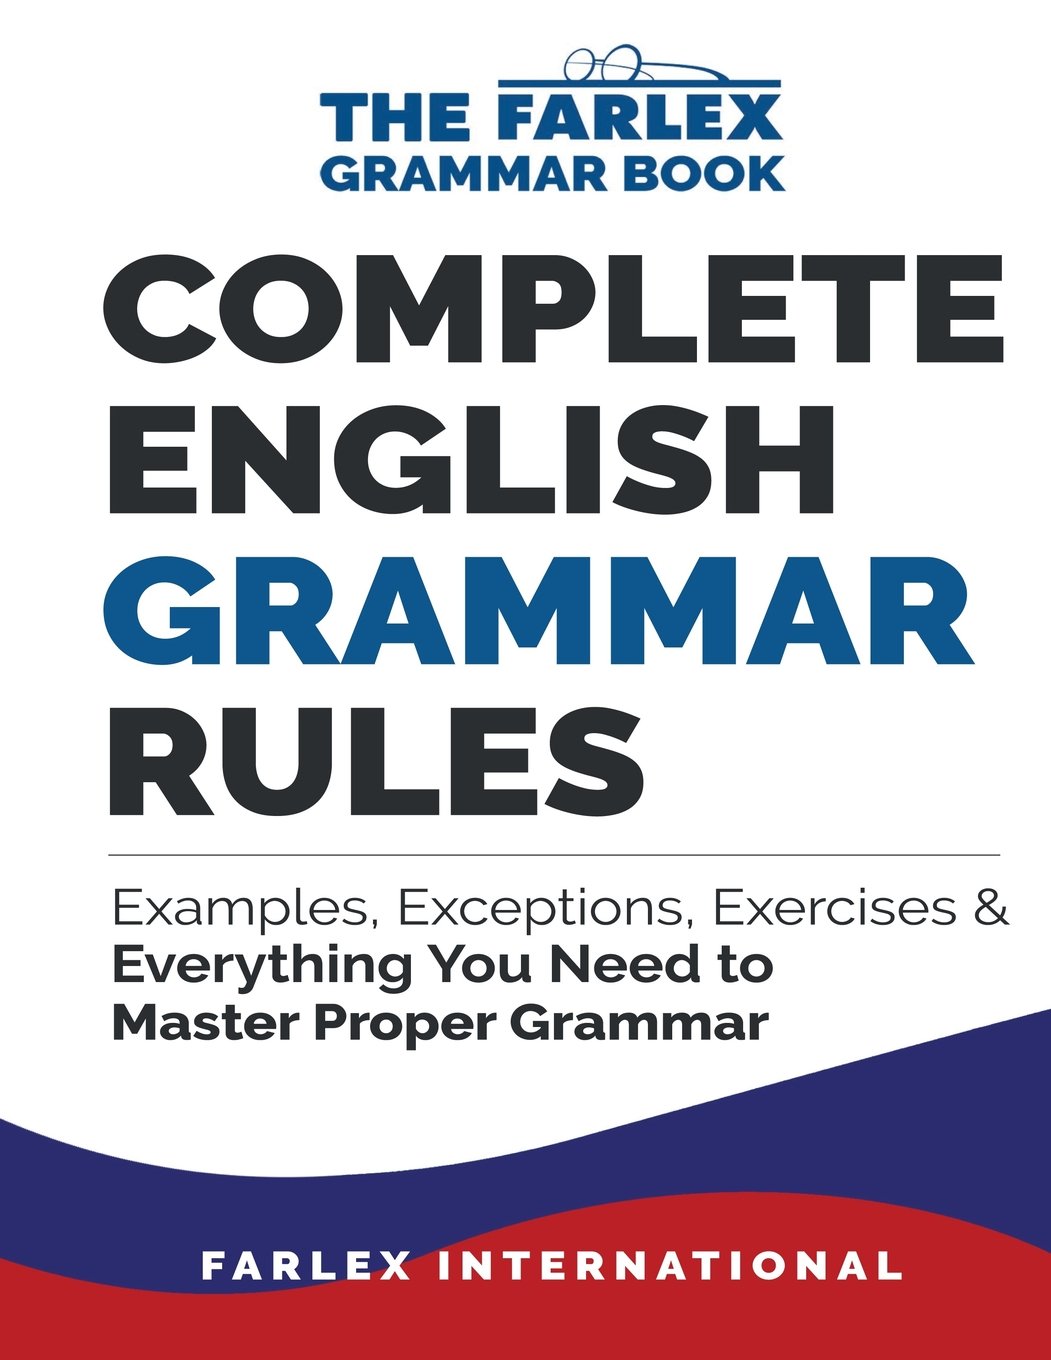 Complete English Grammar Rules: Examples, Exceptions, Exercises, and